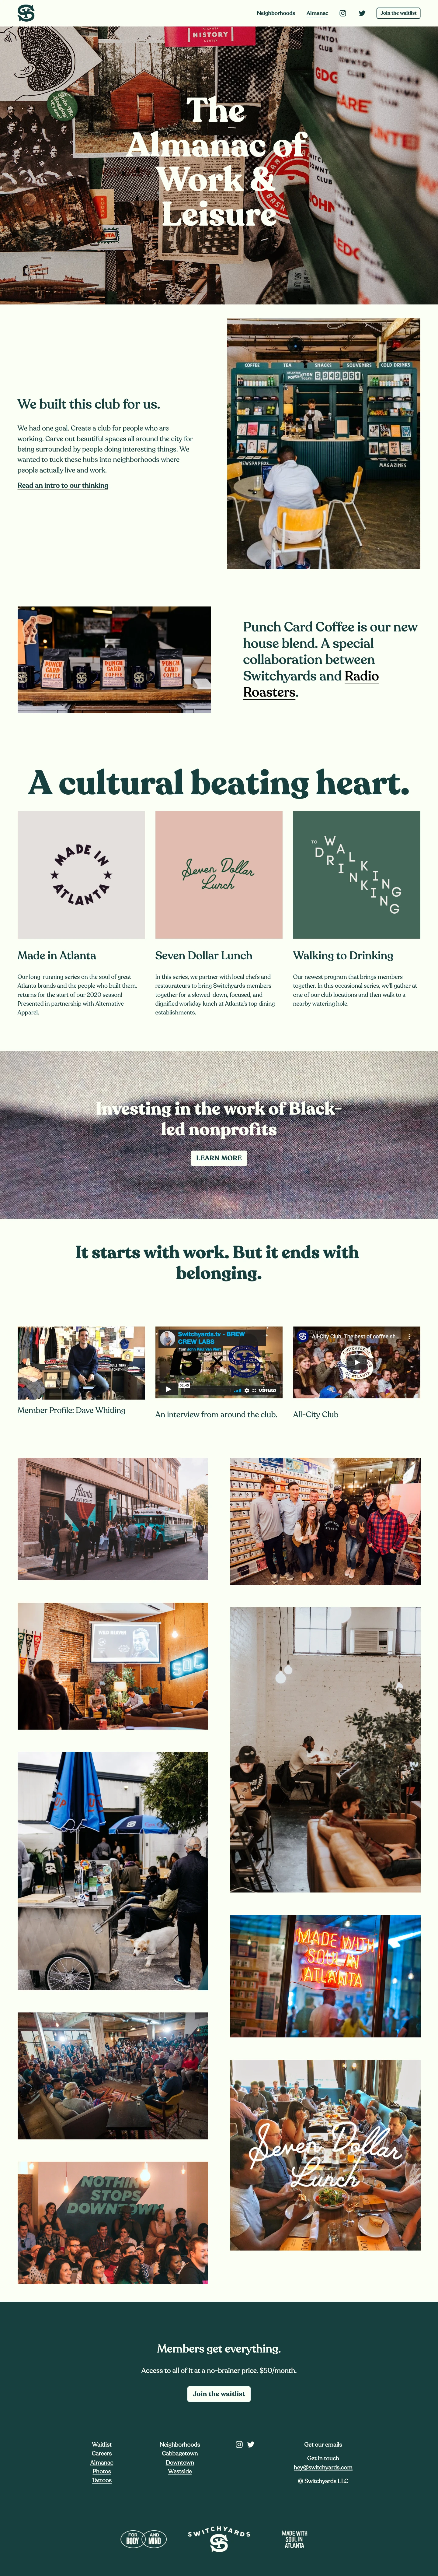 Switchyards Landing Page Example: Switchyards is the country's first neighborhood work club. For when you need to get some work done. And be around others.